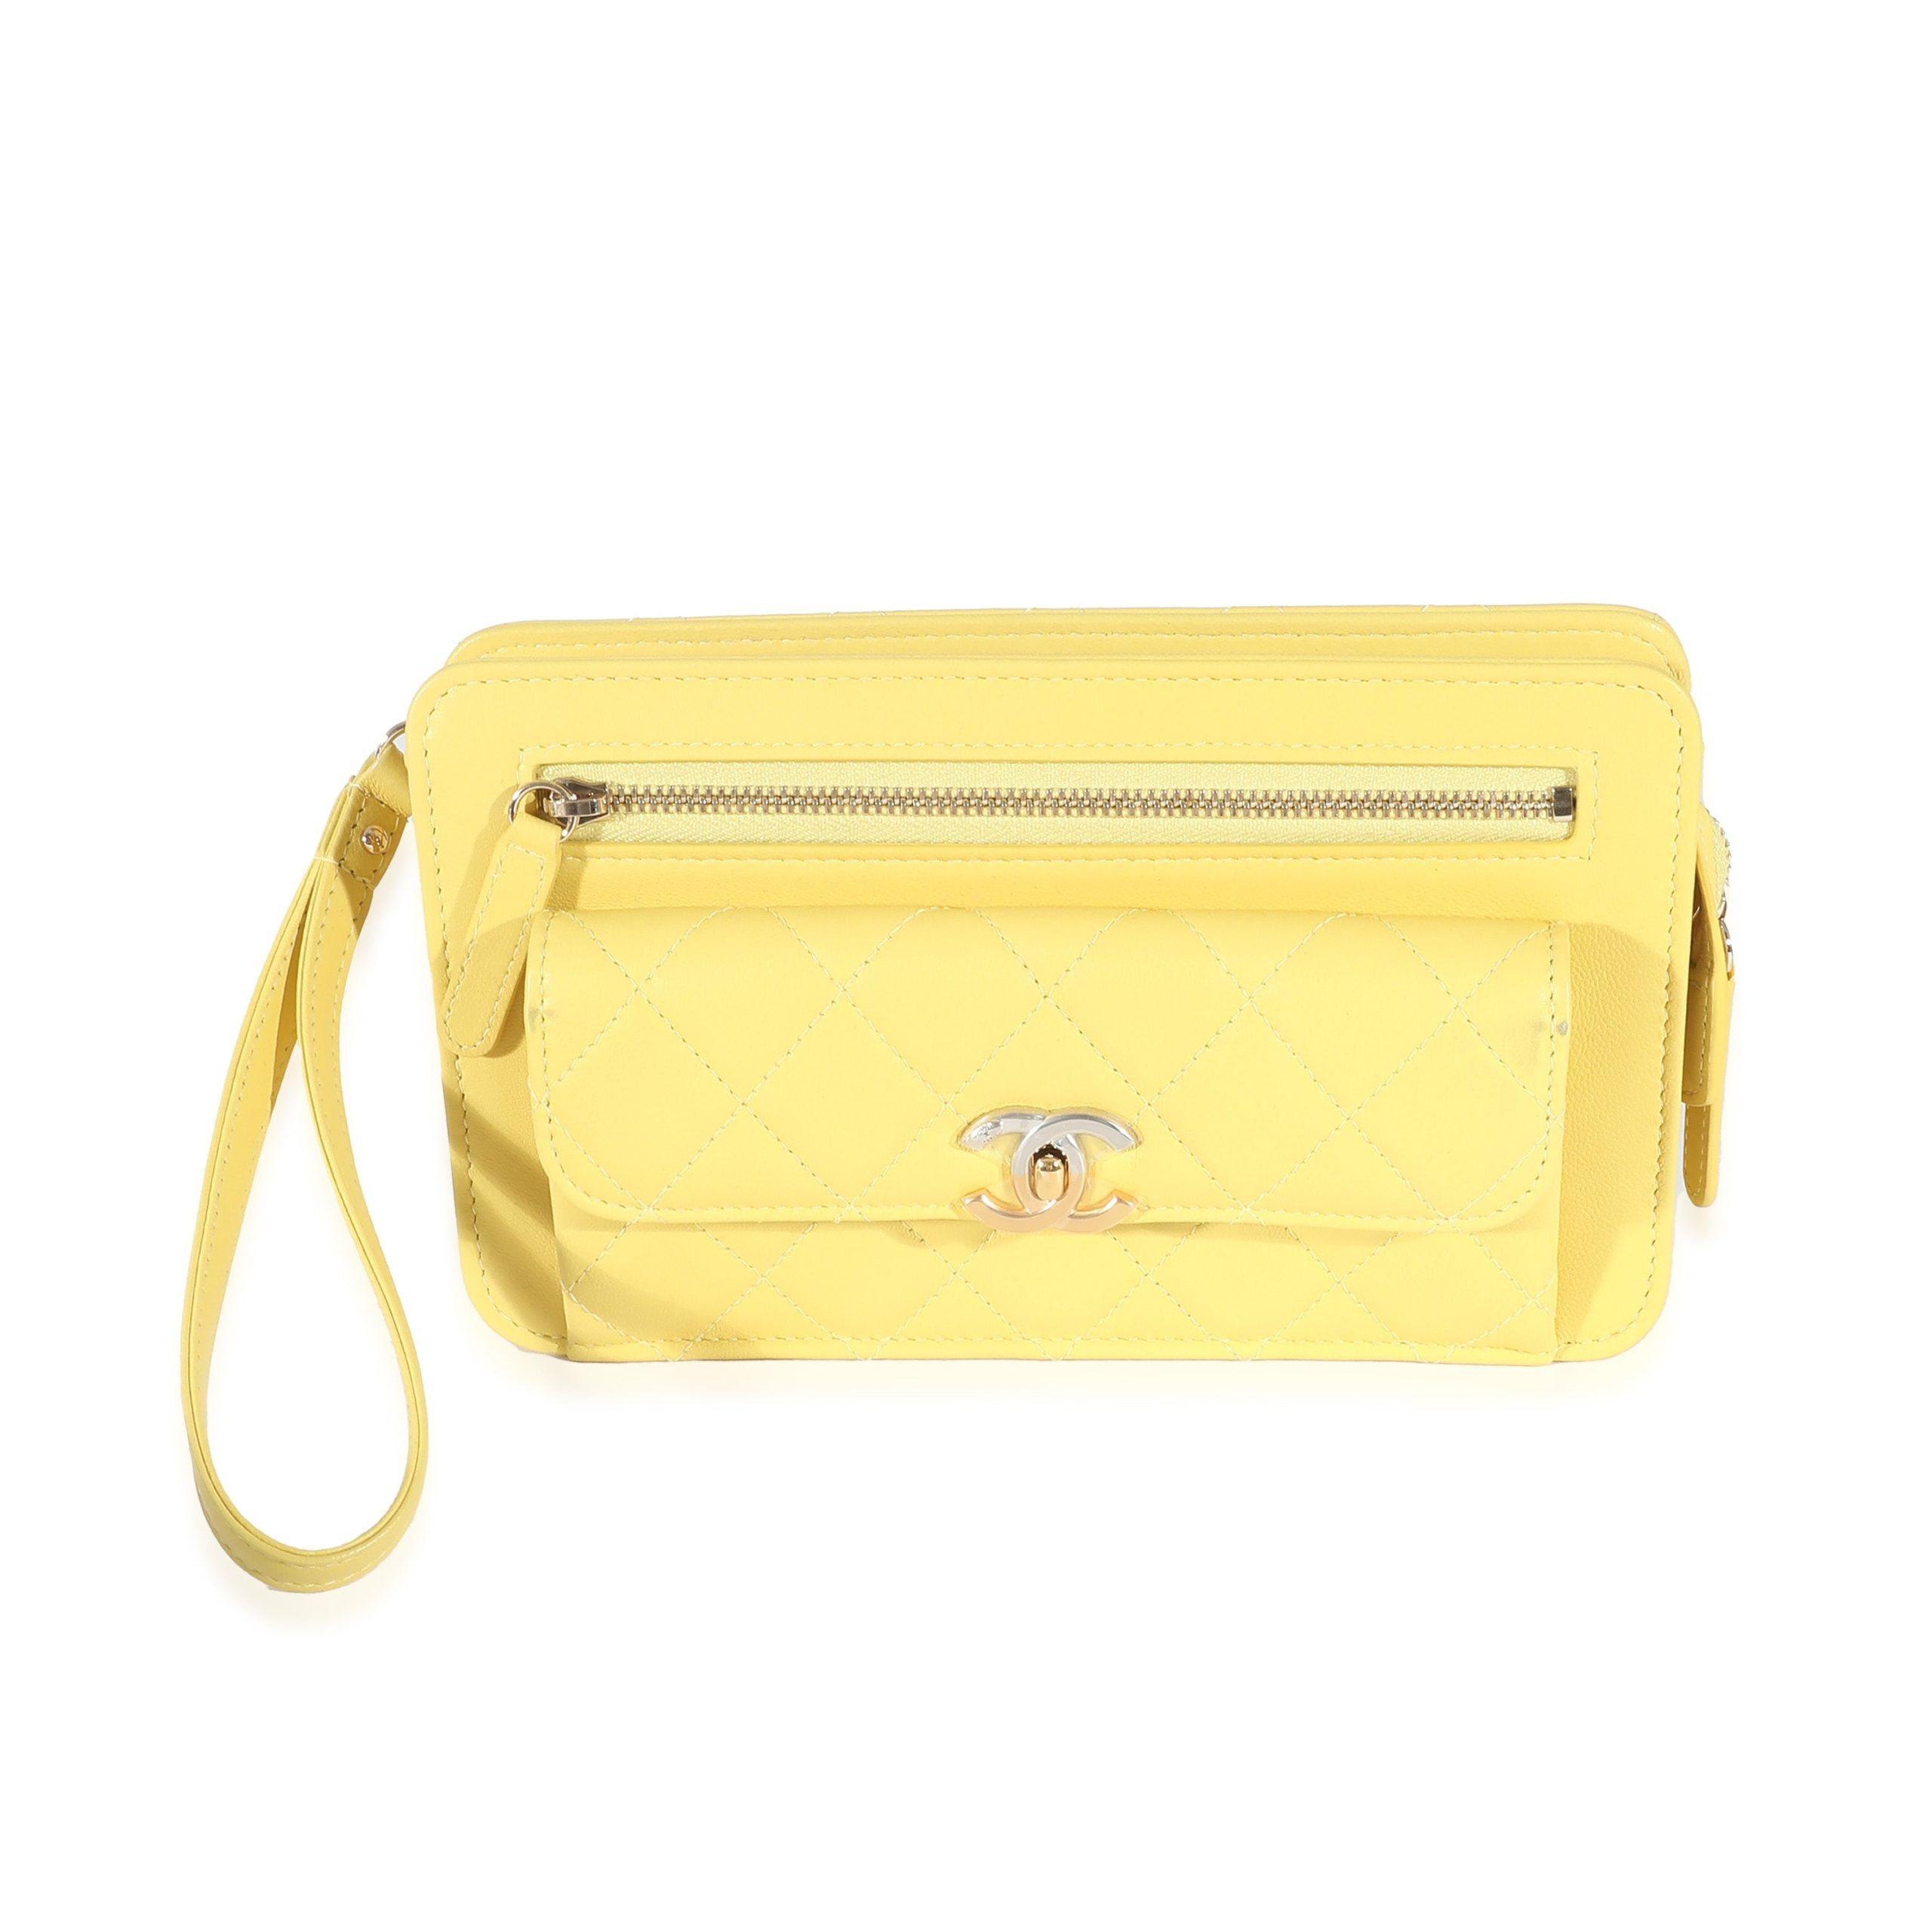 Chanel Chanel Yellow Lambskin Quilted Front Pocket Wristlet Size ONE SIZE - 1 Preview